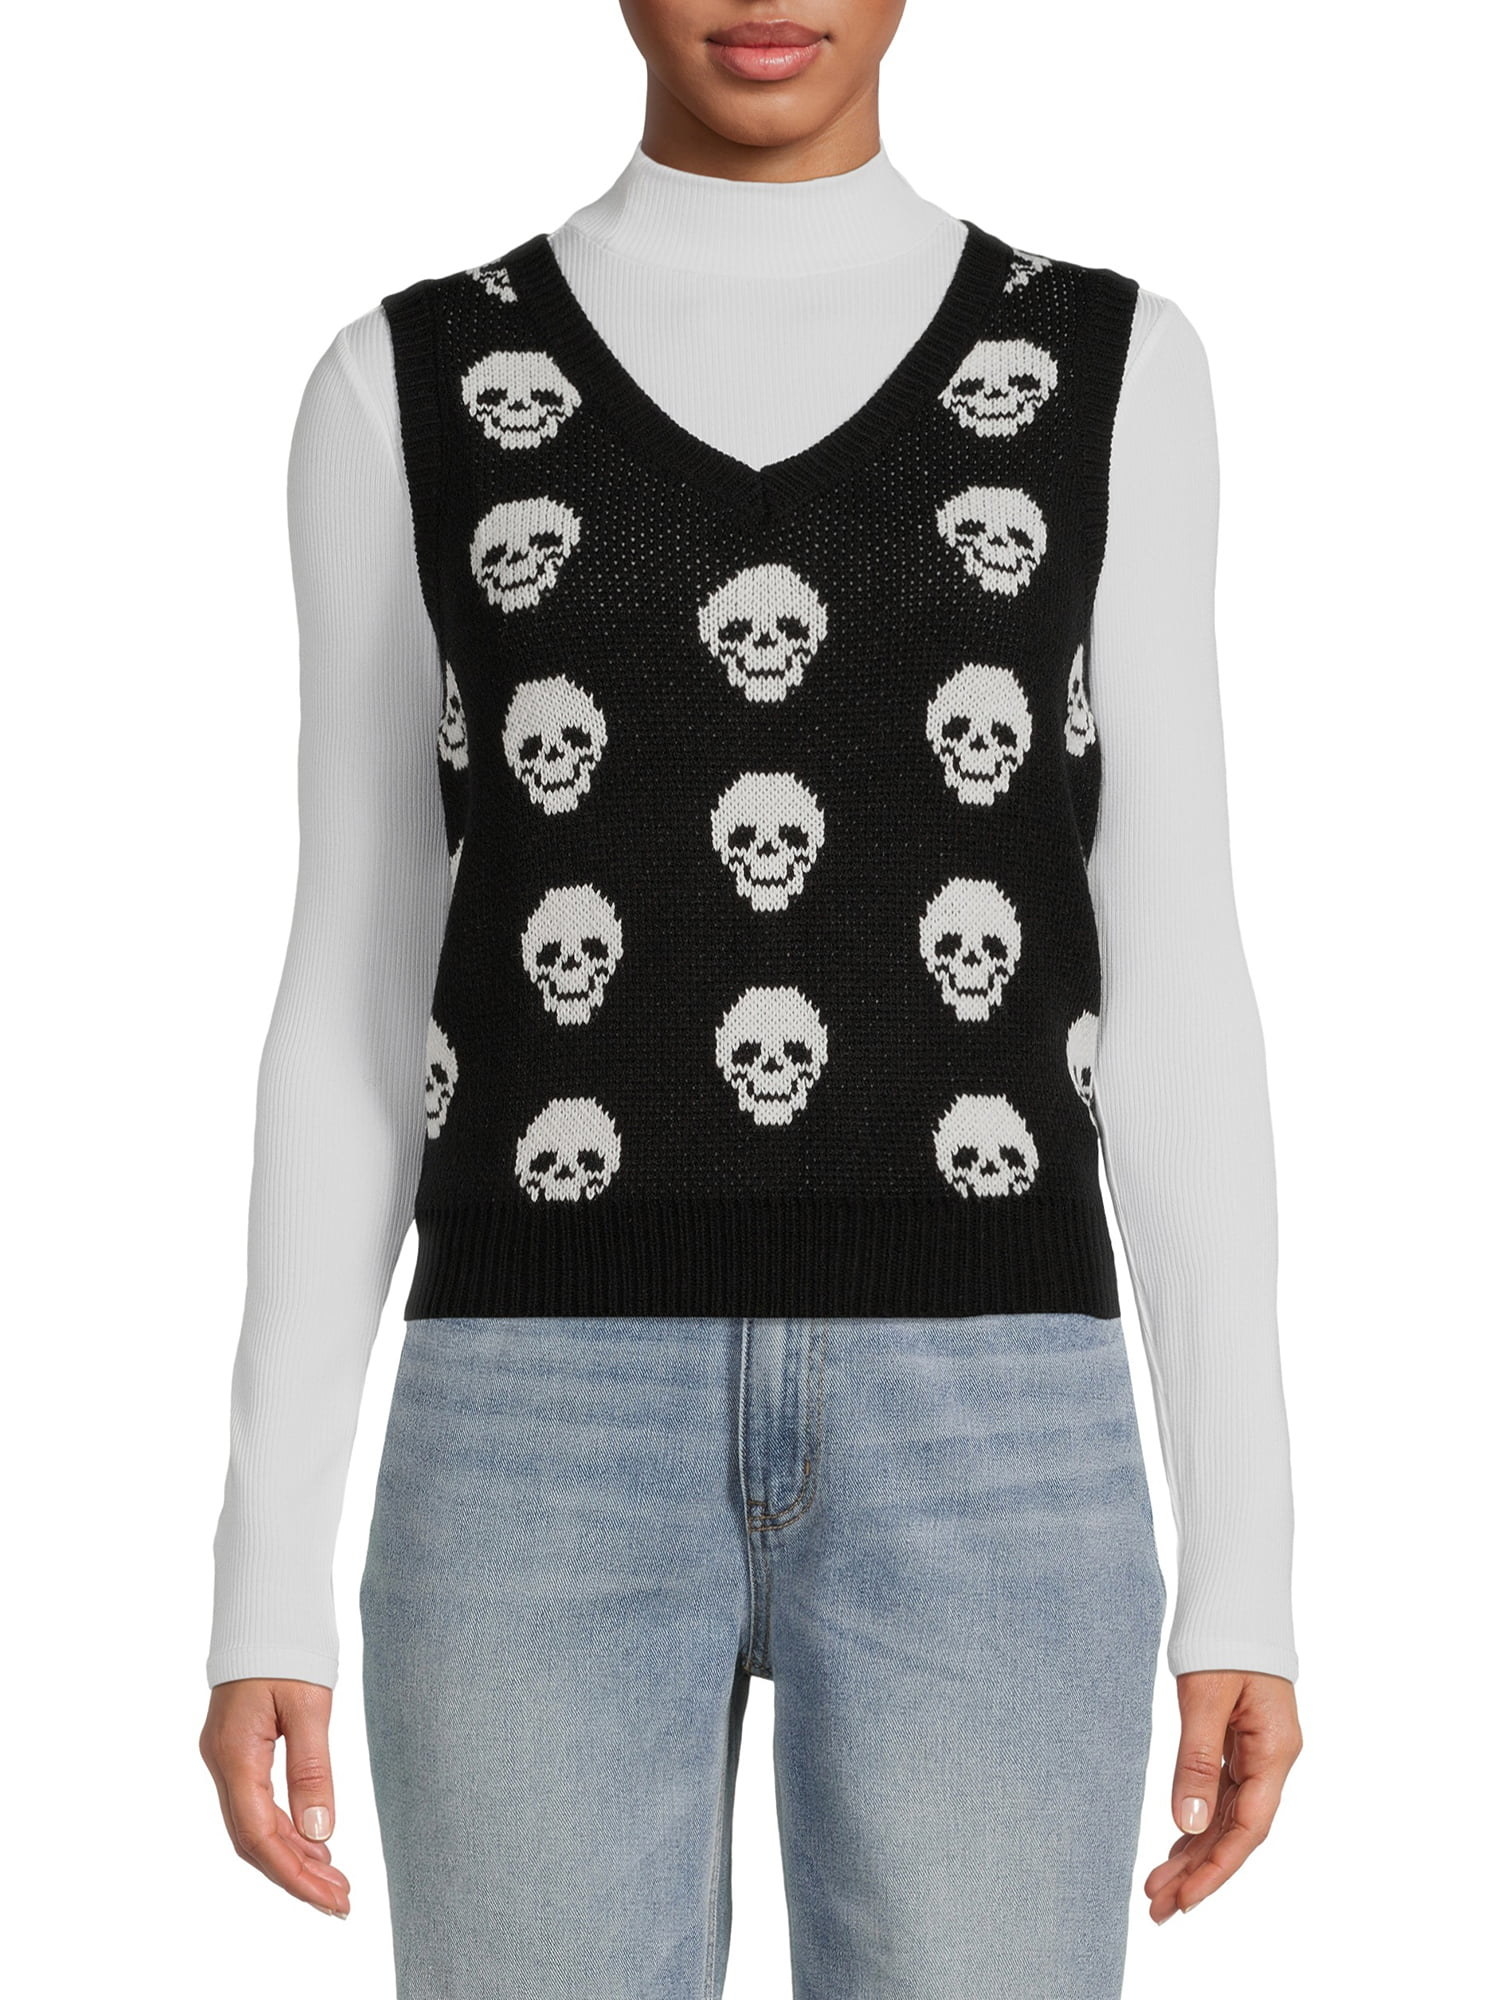 Model wearing black vest with white skulls on it, long sleeve white shirt underneath and blue jeans